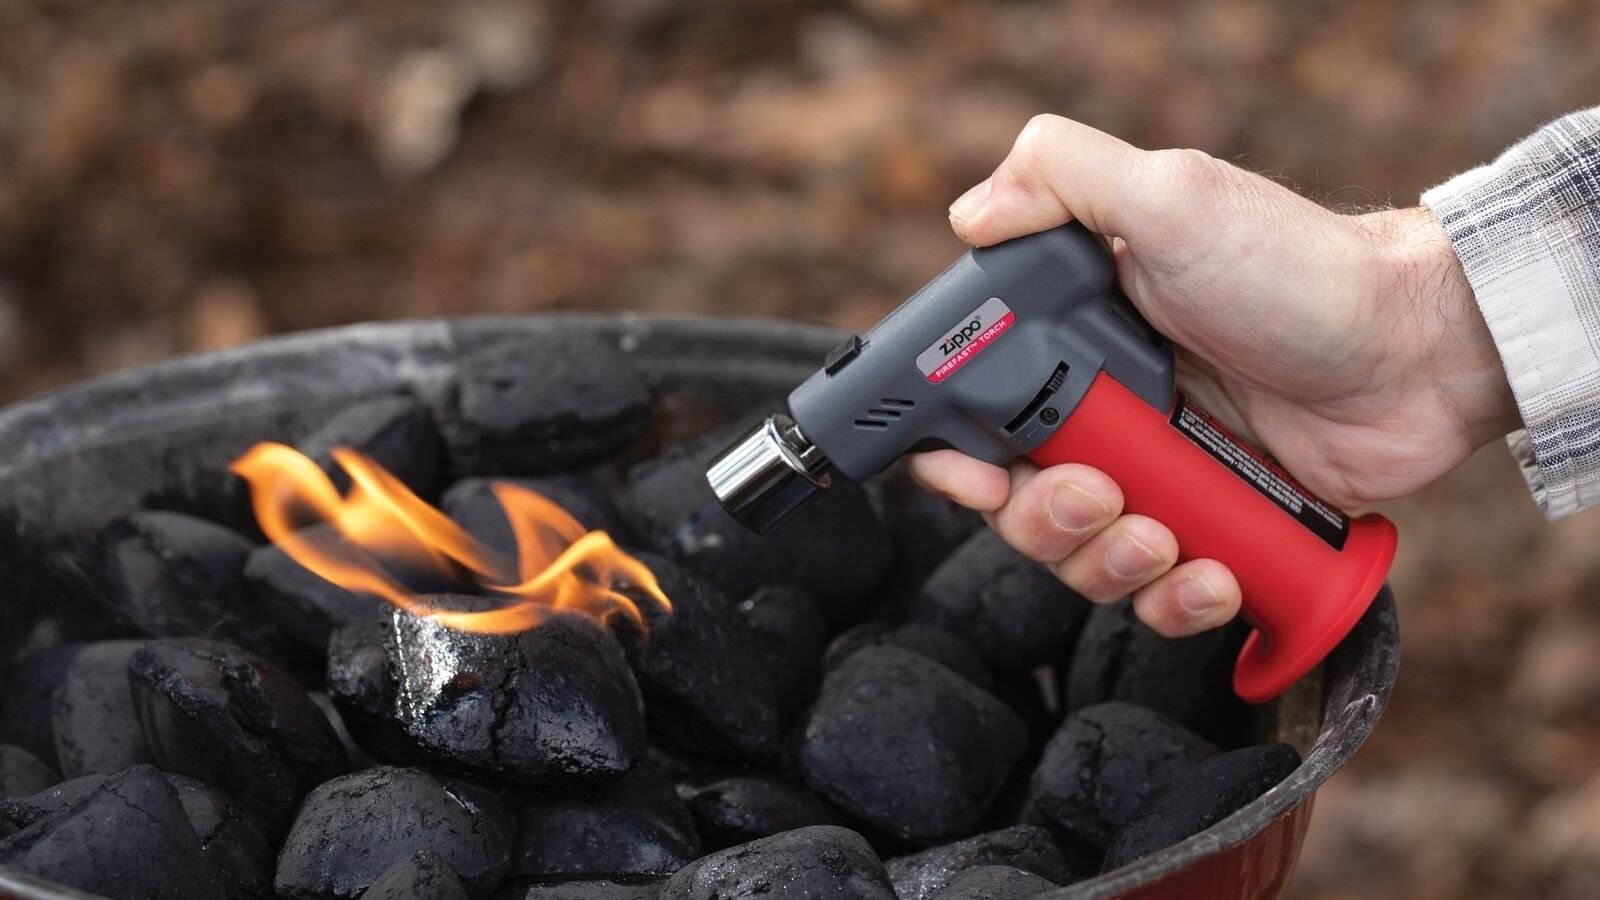 Zippo FireFast Torch adjustable flame lighter has a patented ignition that lights easily